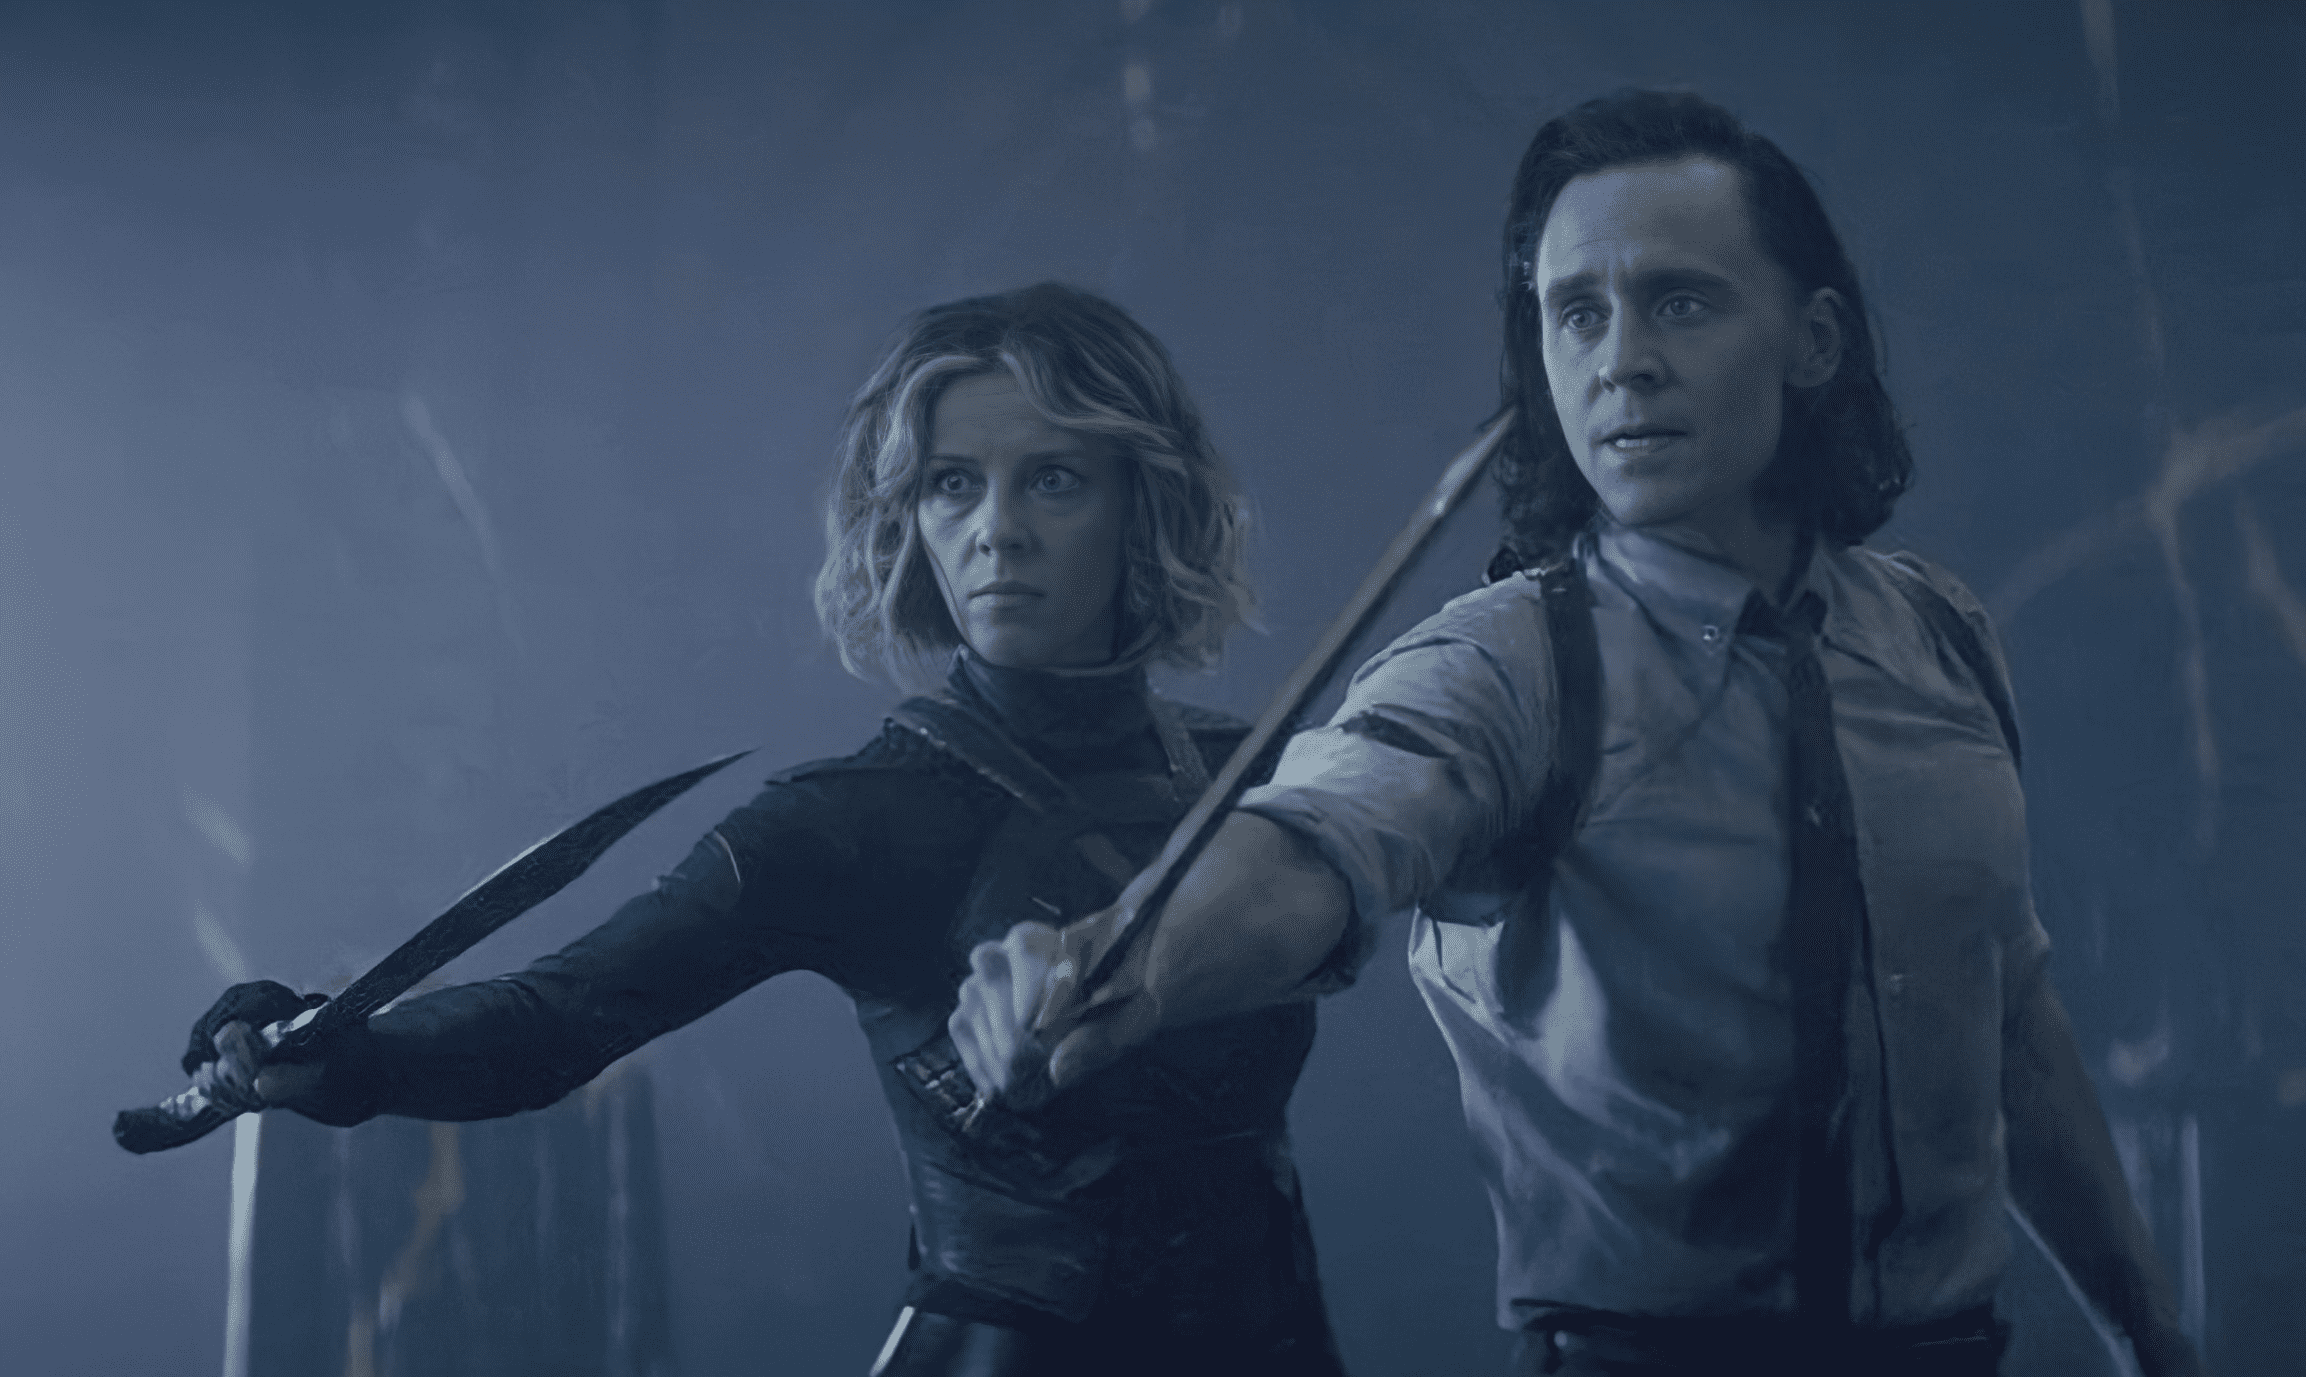 Sylvie and Loki holding up their weapons